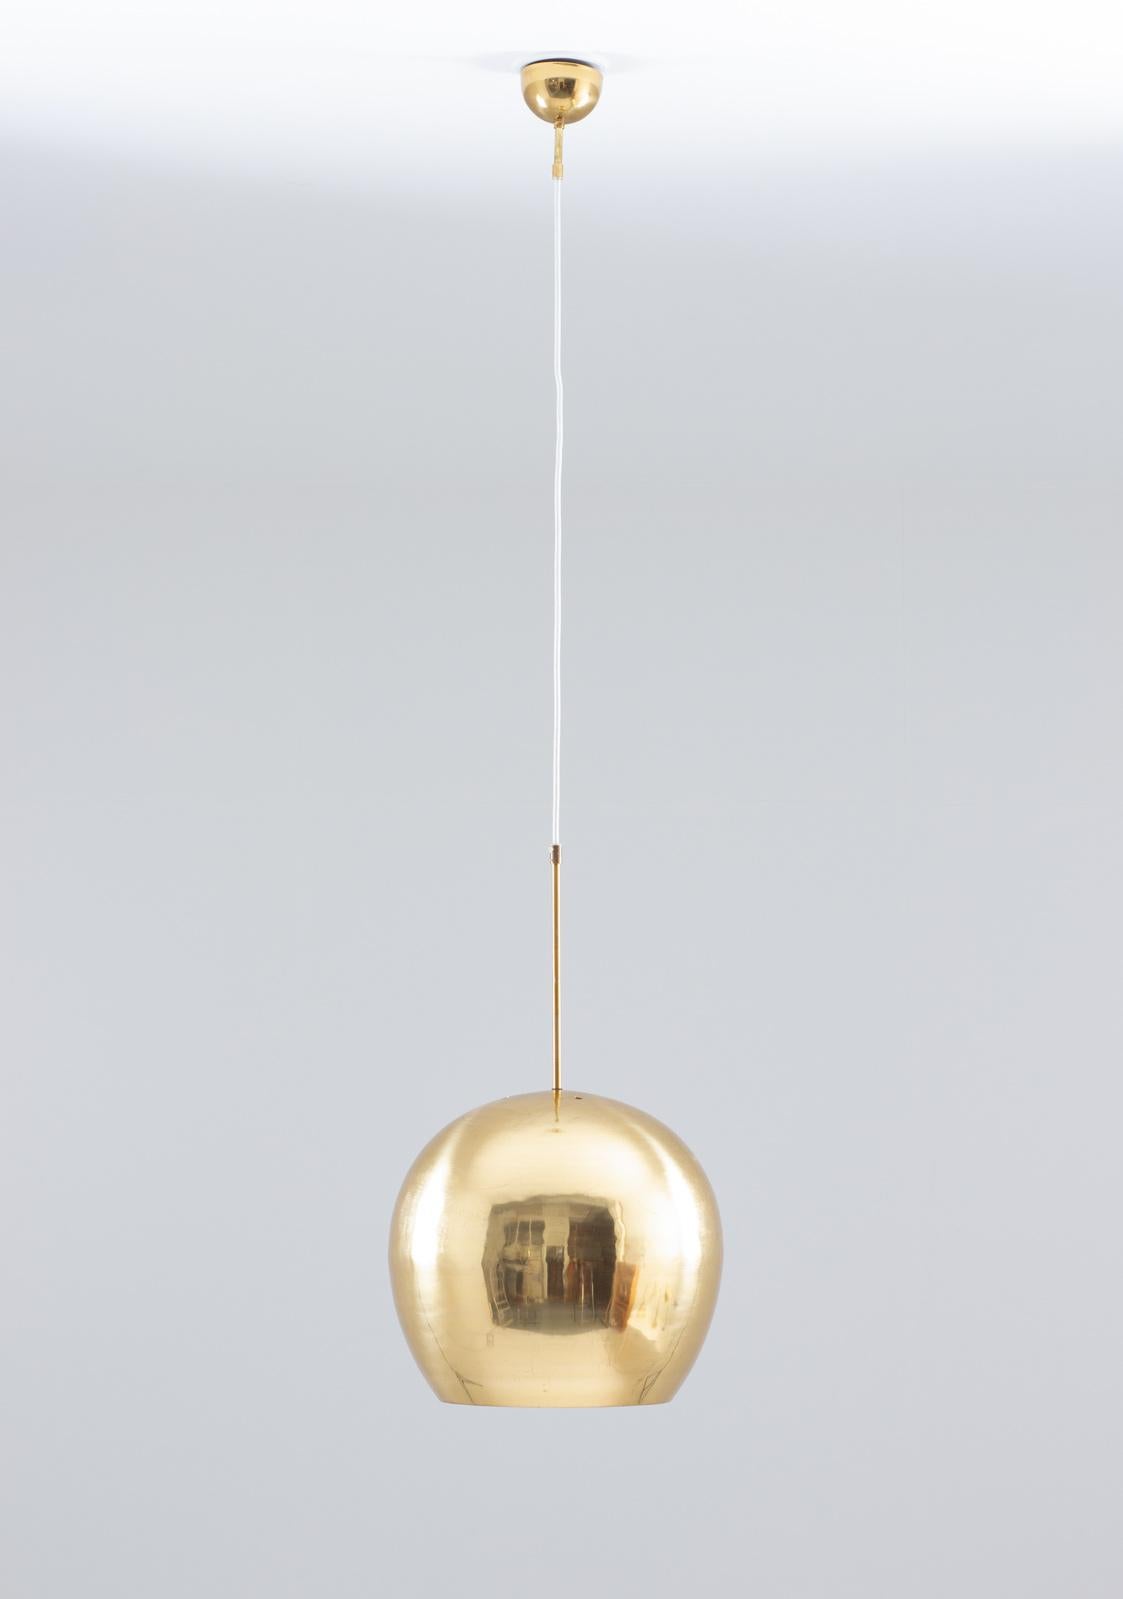 Large pendant in brass, probably produced in Sweden during the 1960s.
This lamp features one light source, surrounded by a large, egg-shaped brass shade.
Condition: Very good condition with light scratches due to age and use.